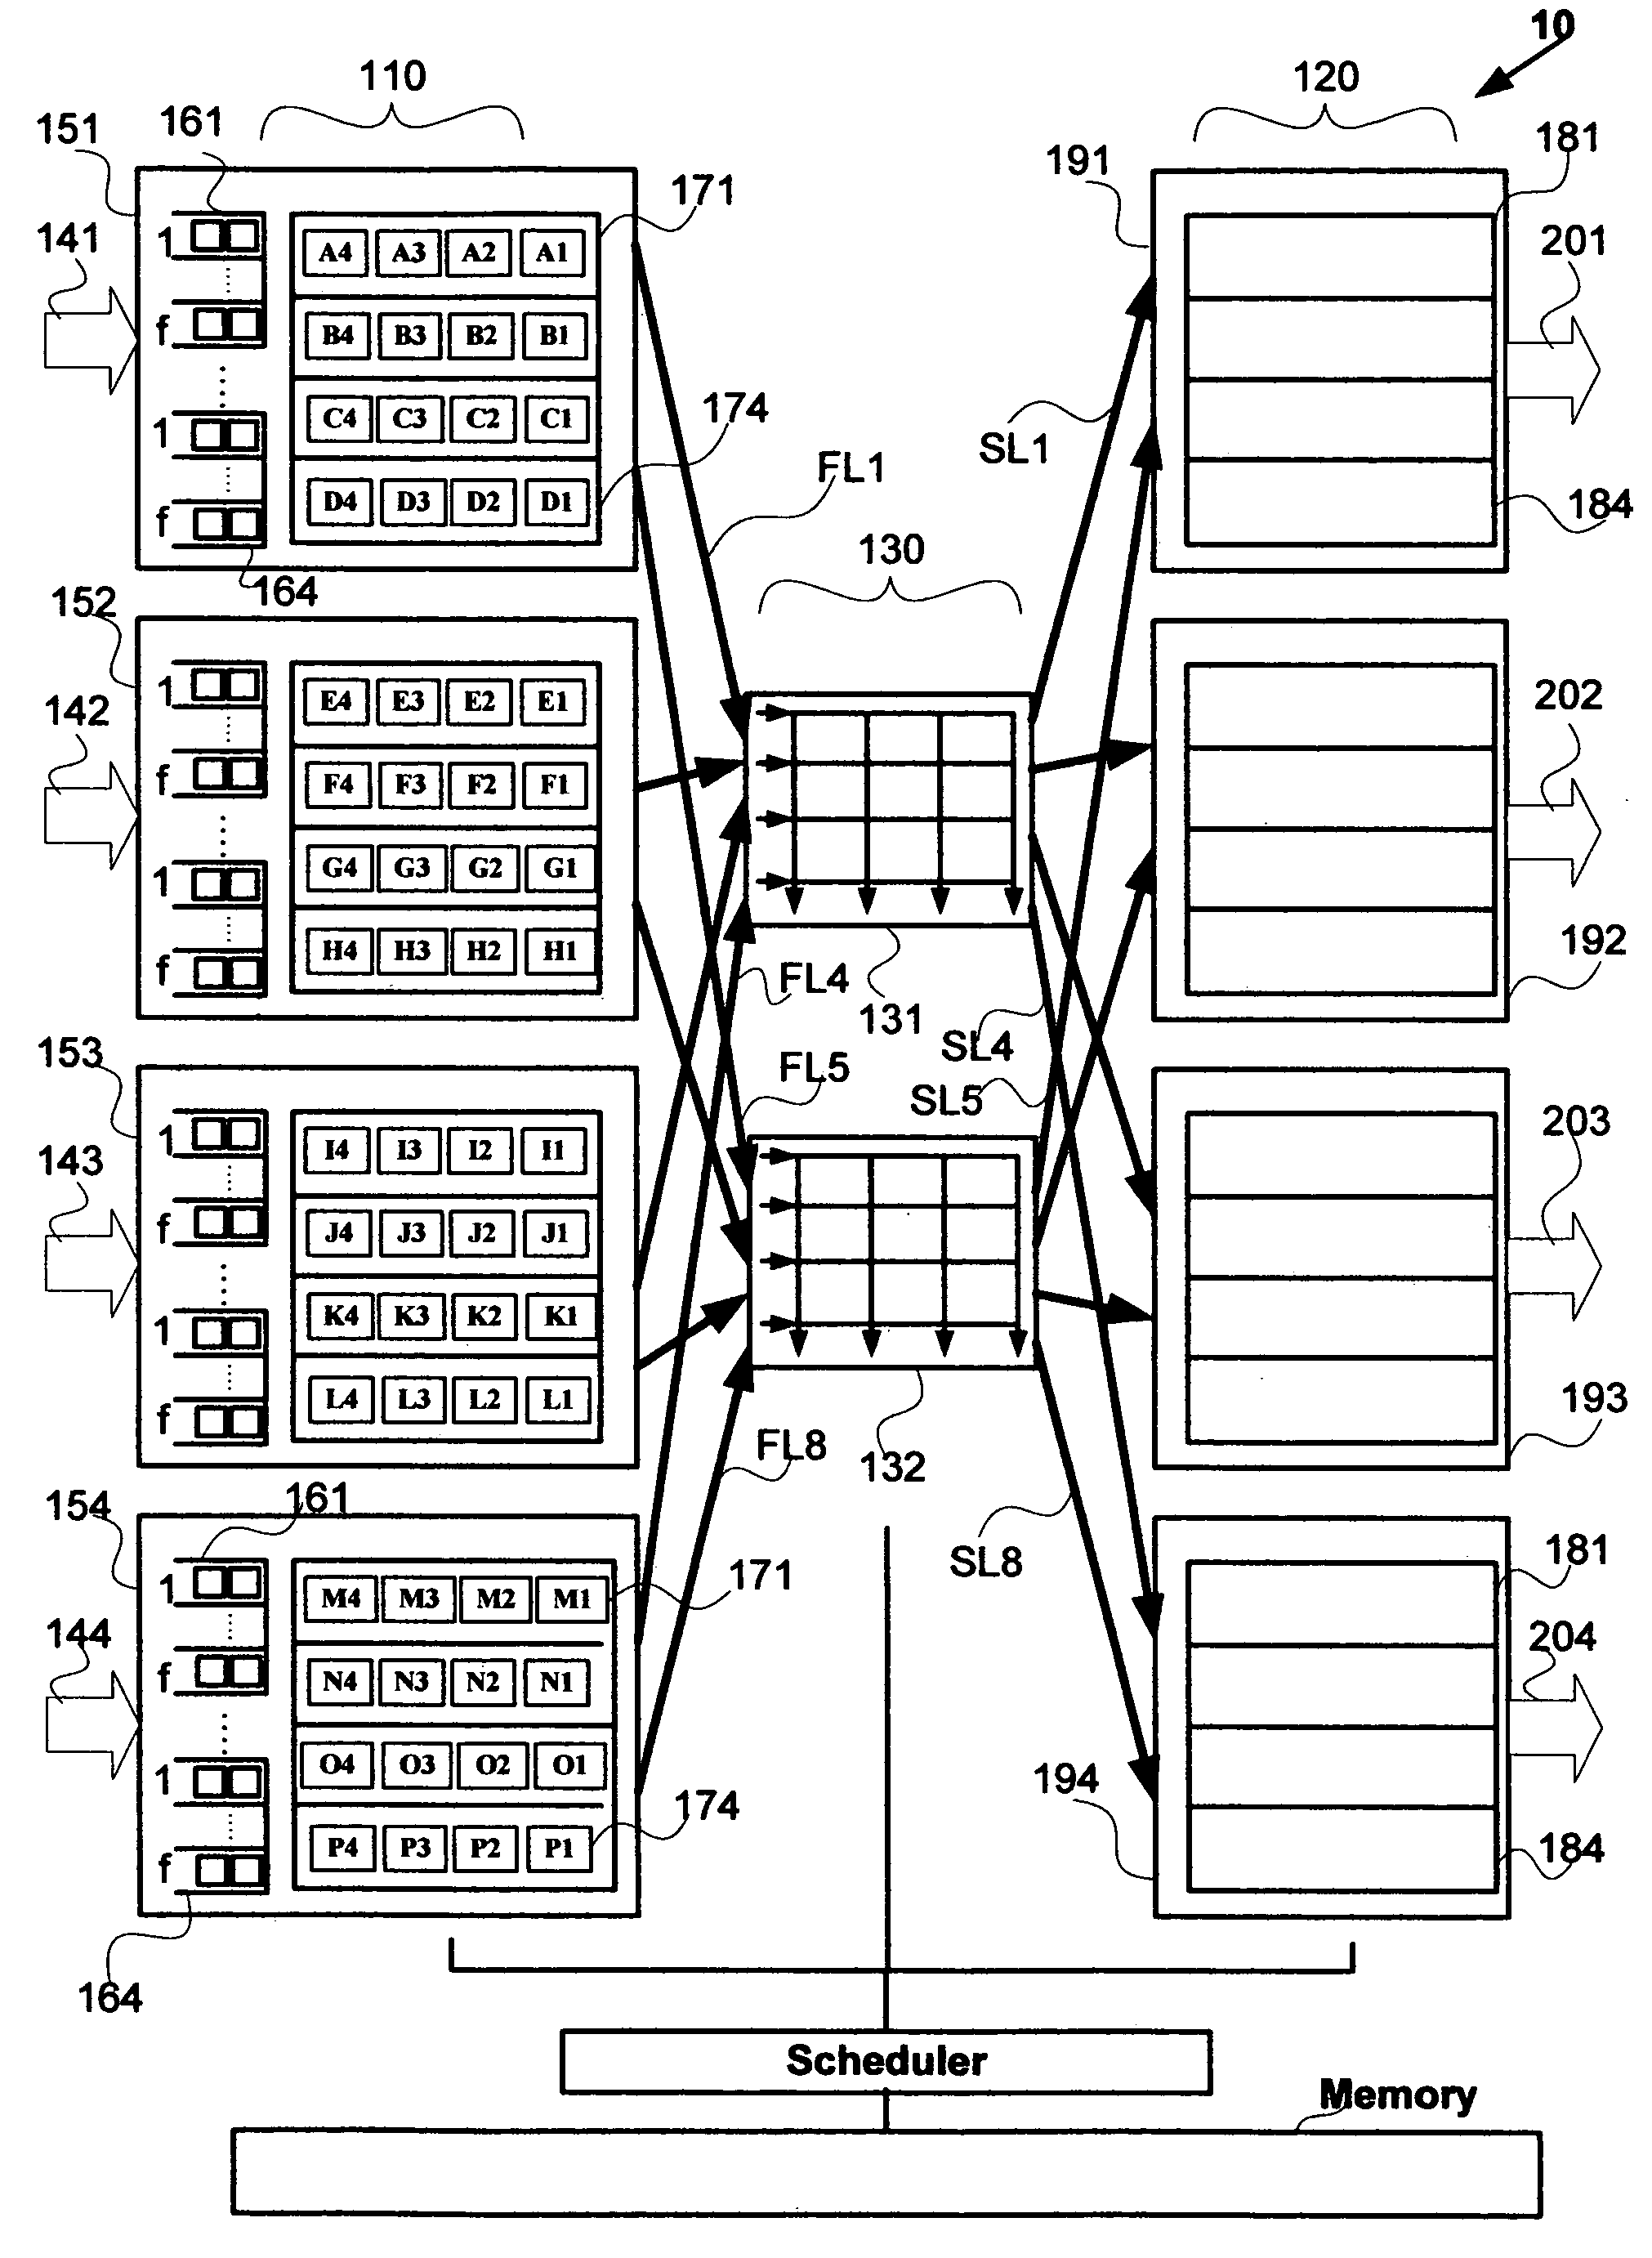 Nonblocking and deterministic unicast packet scheduling